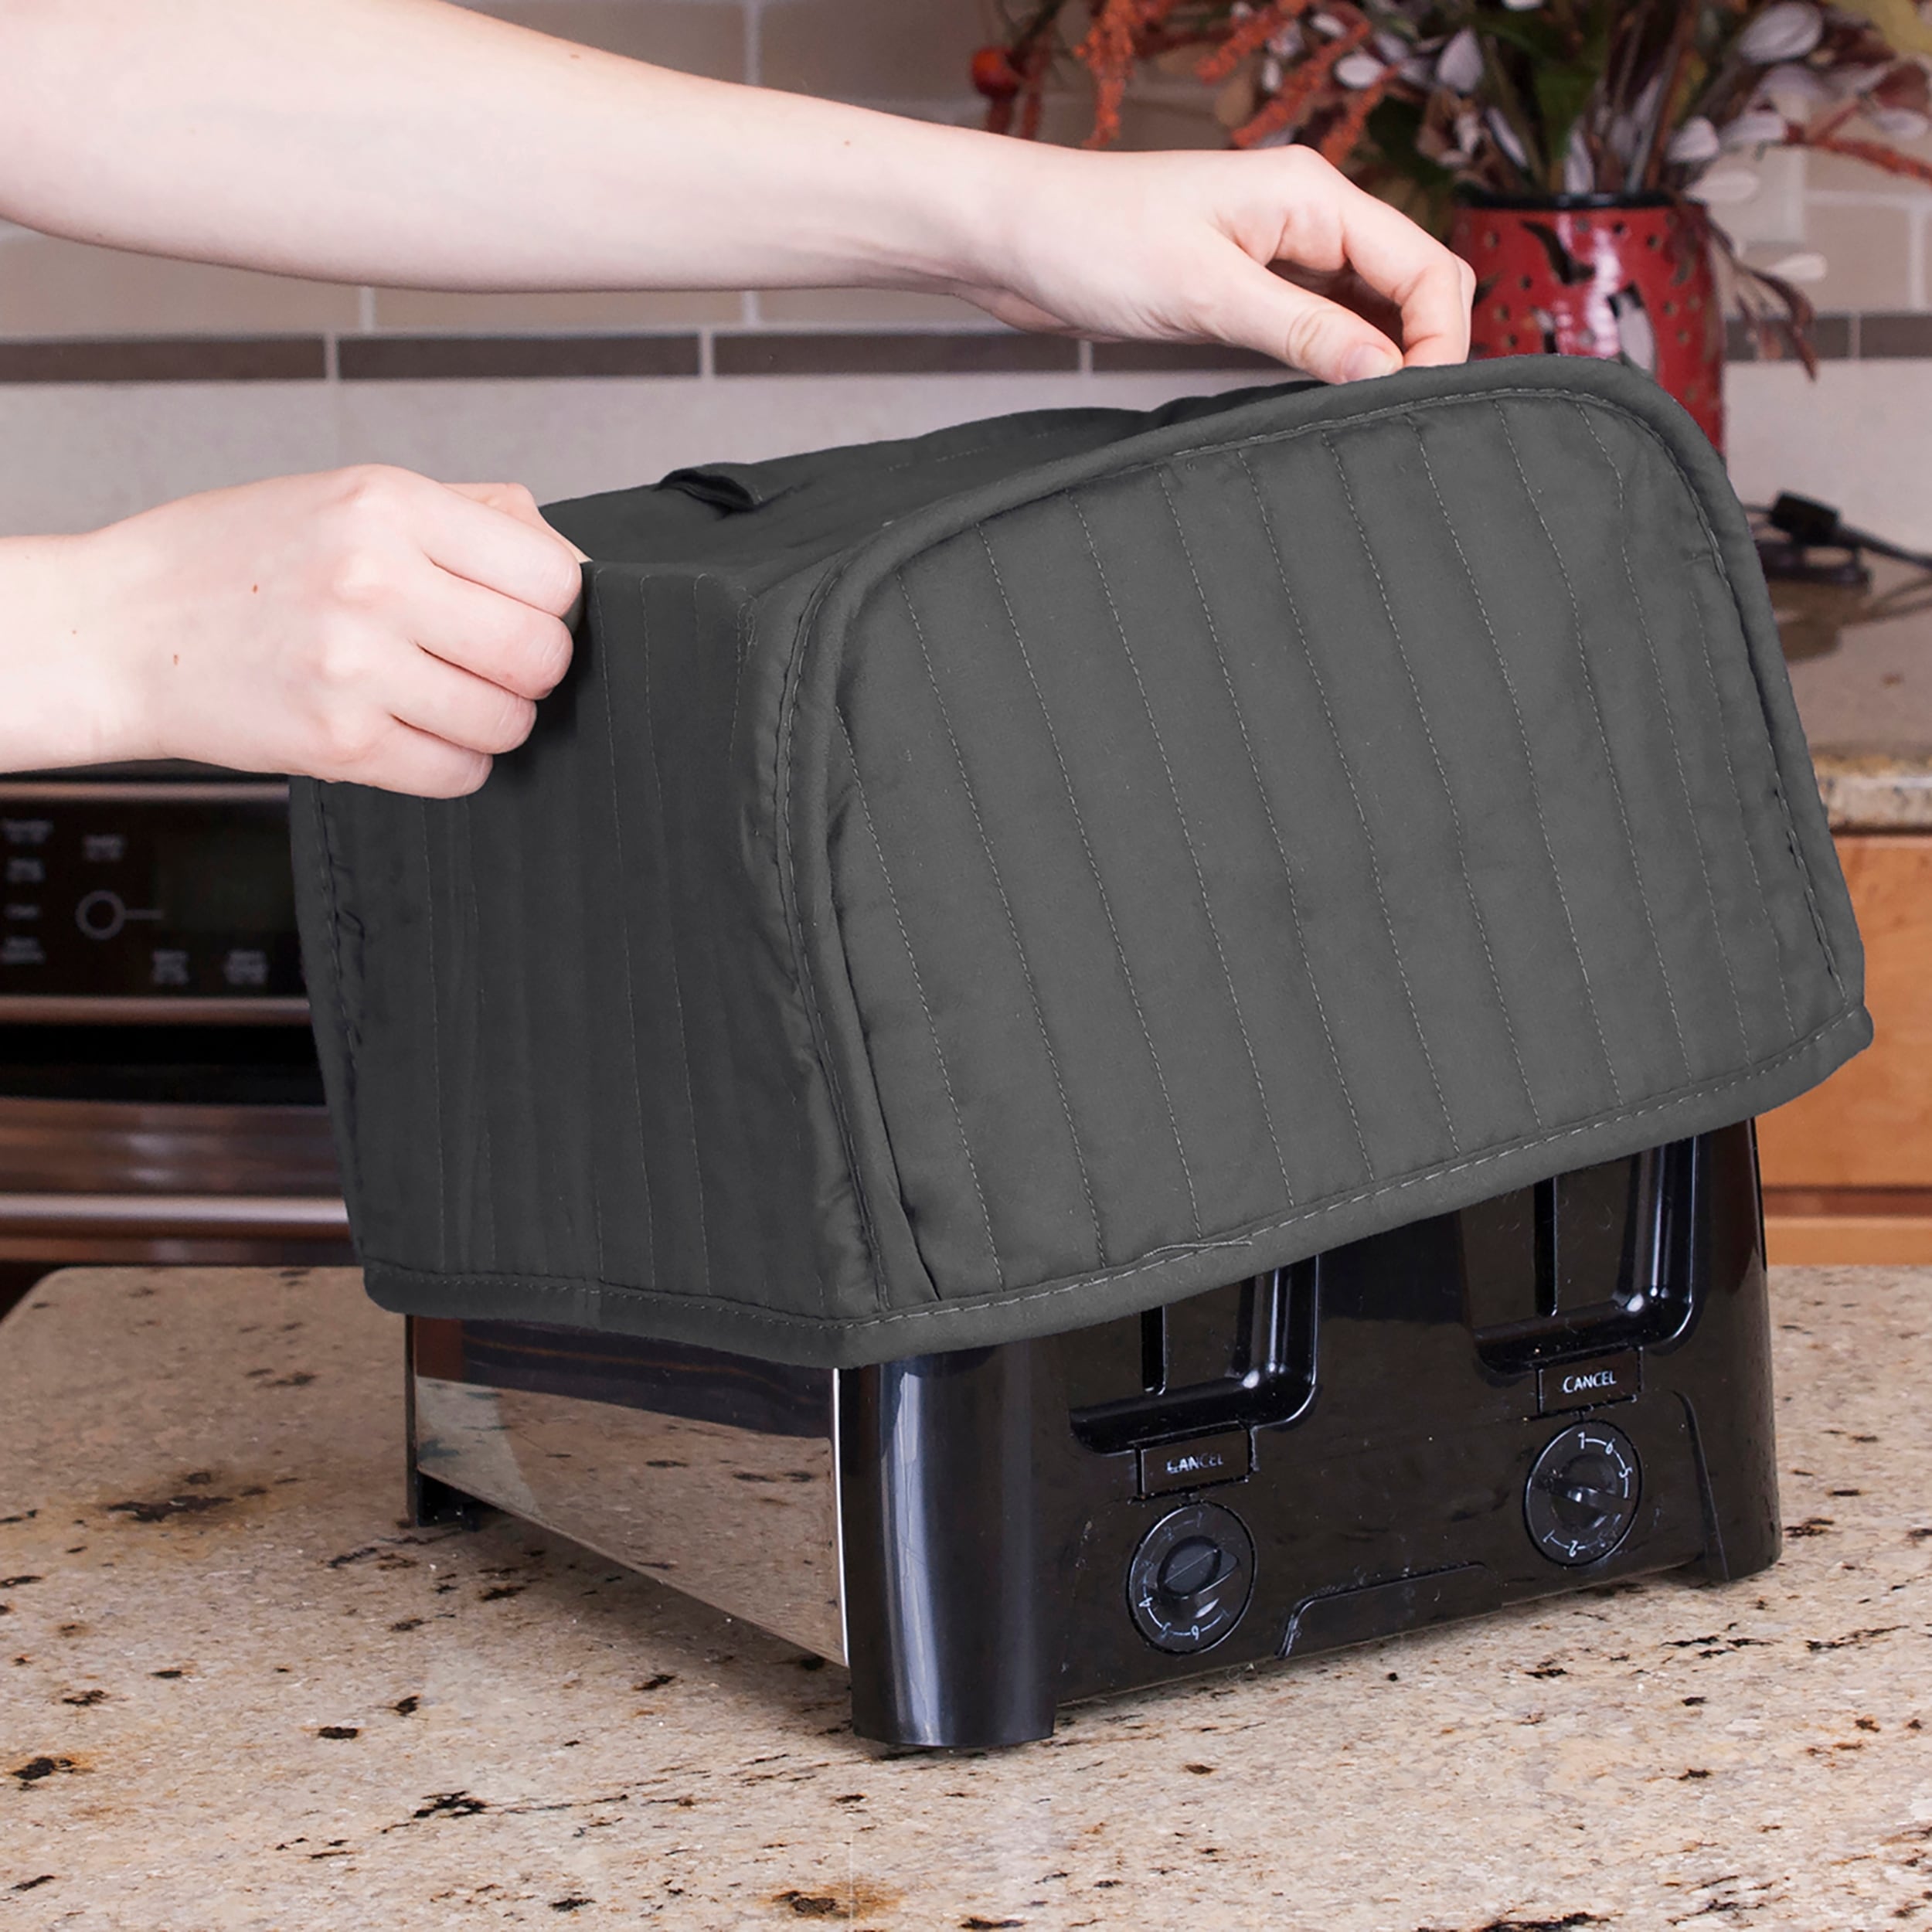 https://ak1.ostkcdn.com/images/products/is/images/direct/eb461e79d287155b7c839e684d40f02f8d5dcd49/Solid-Graphite-Four-Slice-Toaster-Cover.jpg